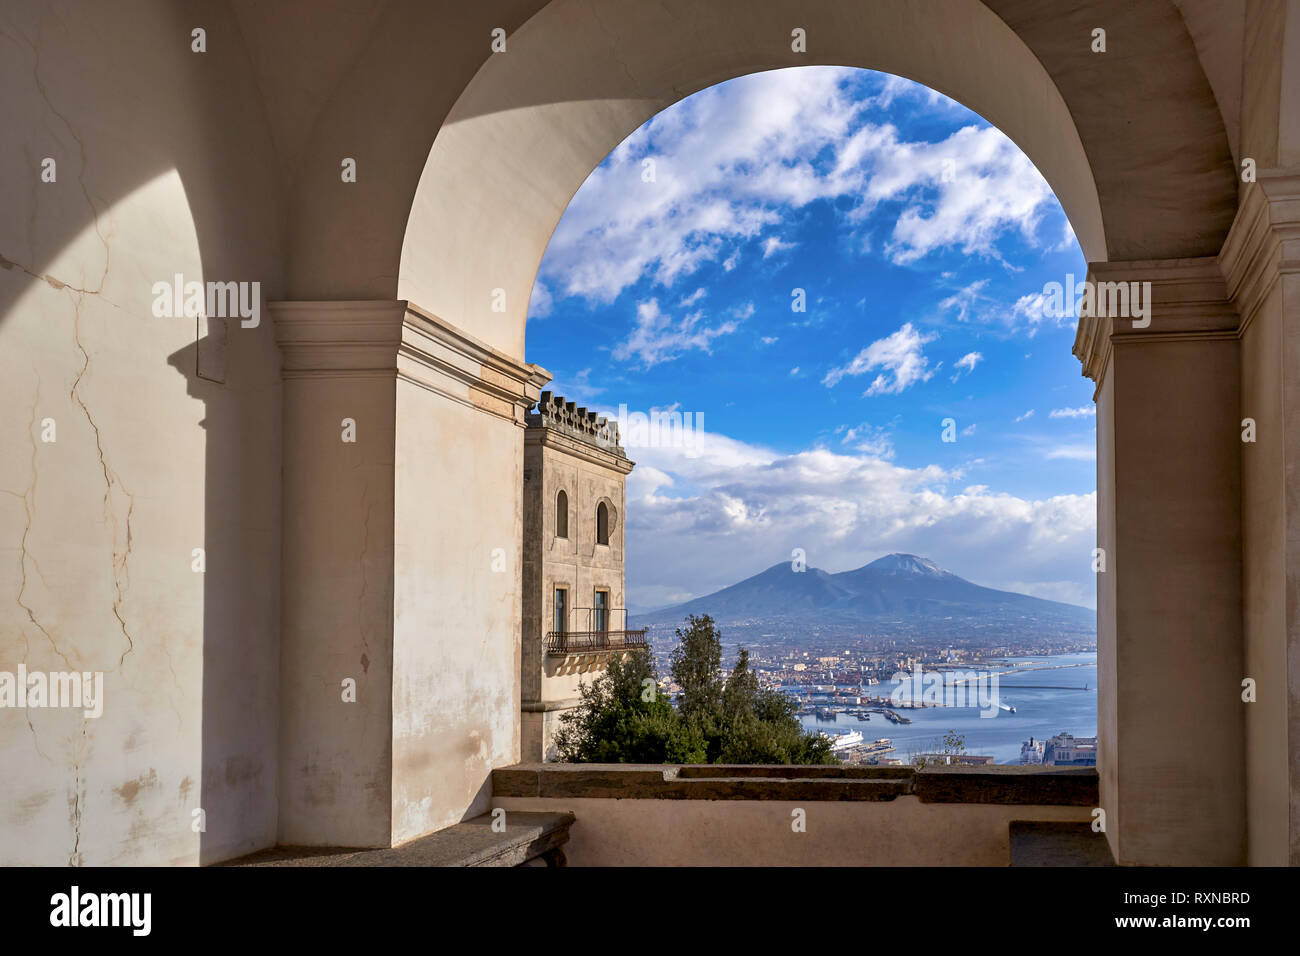 Naples Campania Italy. View of the gulf of Naples and Mount Vesuvius from the Certosa di San Martino (Charterhouse of St. Martin), a former monastery  Stock Photo